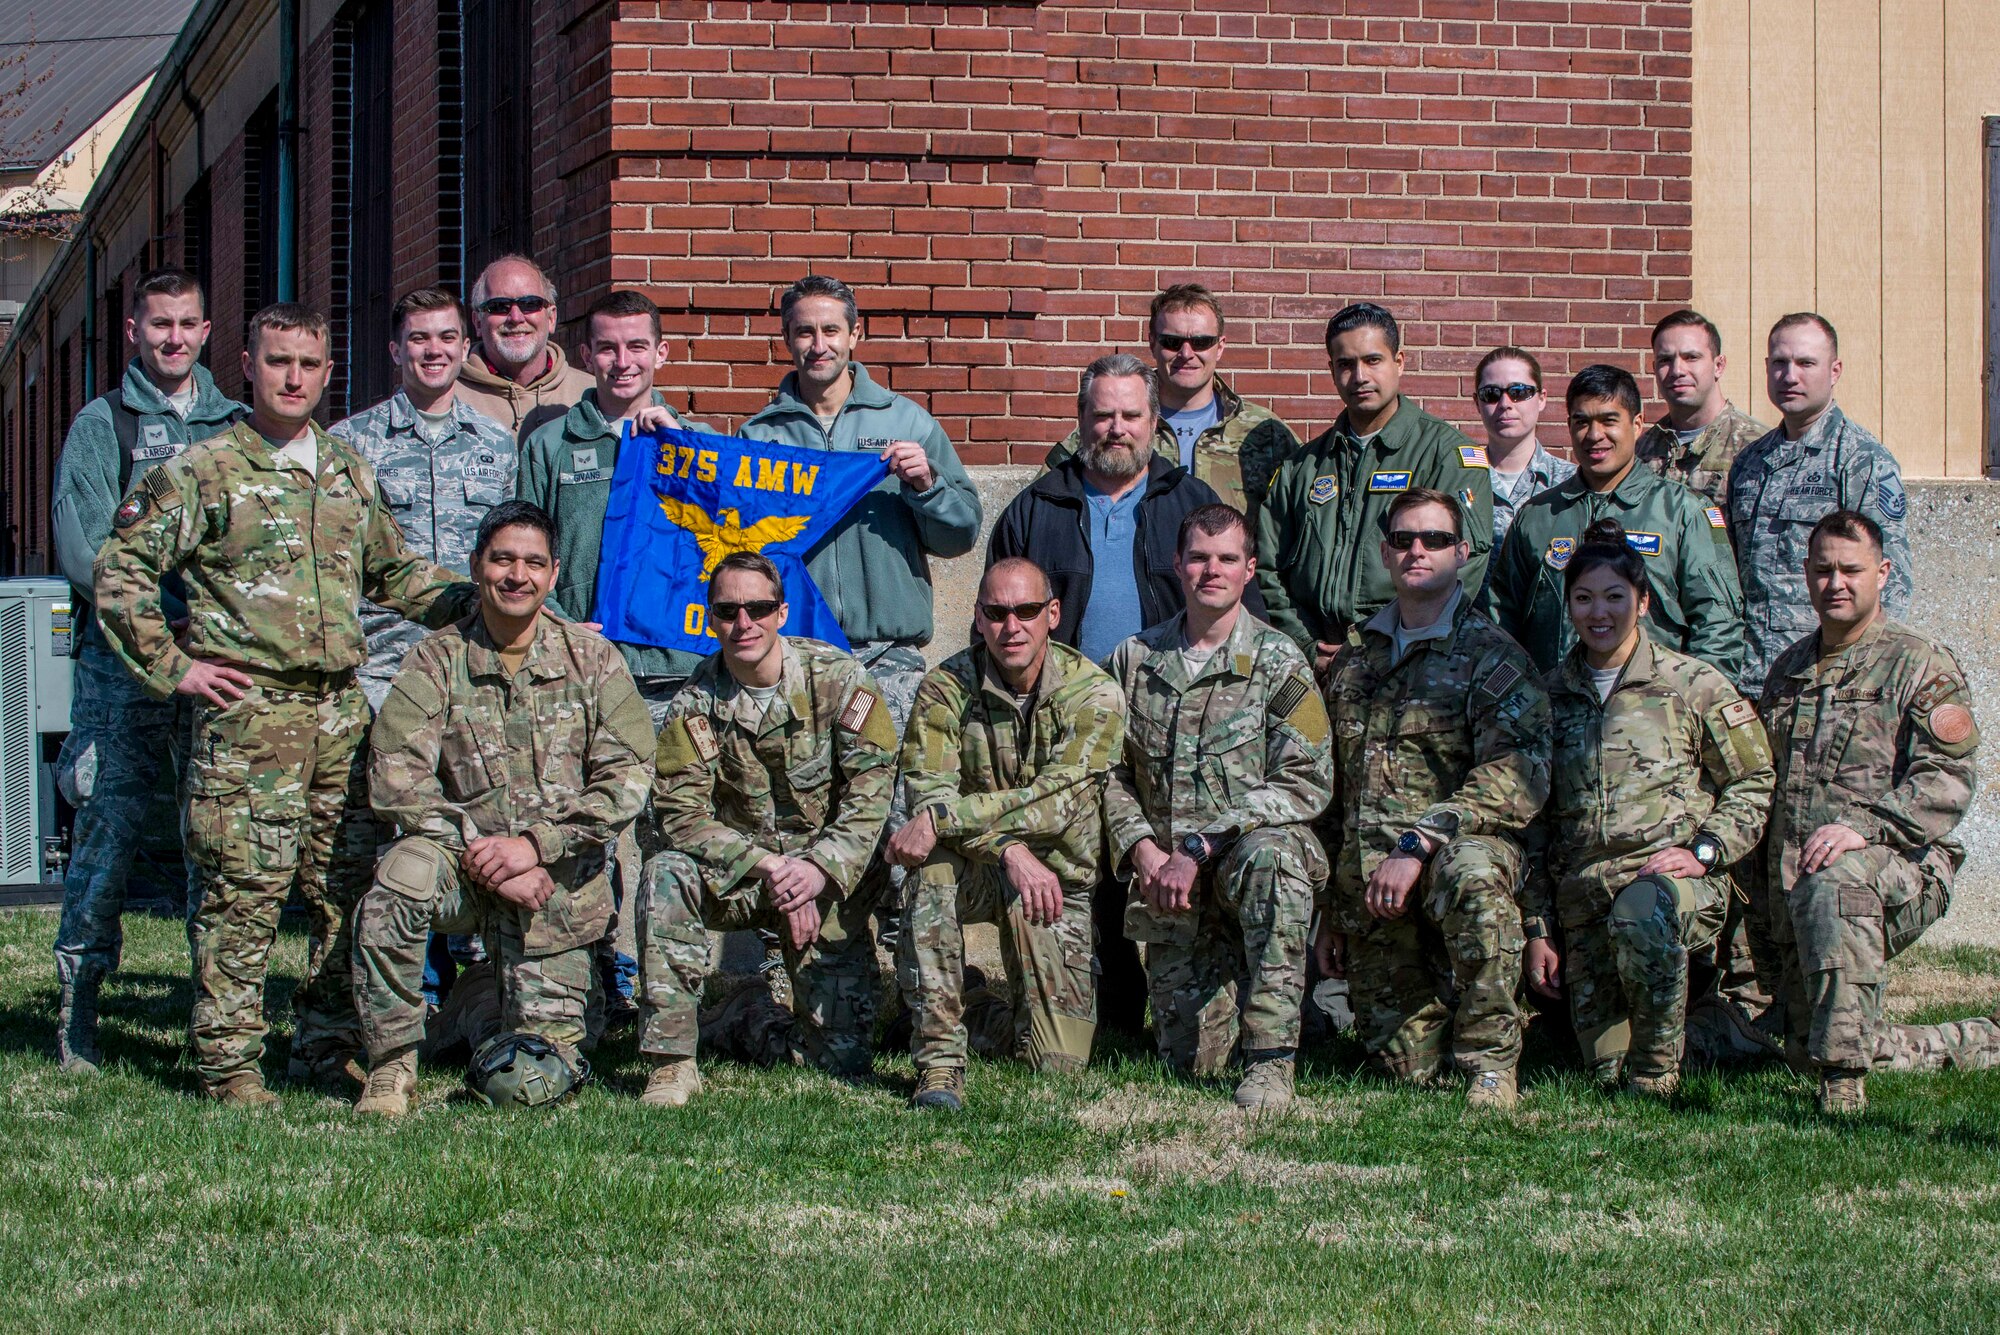 Scott Air Force Base hosted its first ever air drop with members of the 375th Operations Support Squadron's Survival, Evasion, Resistance, and Escape (SERE) unit and members of  the 19th OSS from Little Rock AFB as well as members of the Air National Guard participating in a jump over the drop zone on March 2, 2017 at Scott AFB, Illinois. Scott hosted this jump to streamline its capabilities and jump program while offering jumpers an opportunity to get required jumps accomplished as they face weather challenges elsewhere. The 375th OSS created the drop zone to increase the readiness of units in and around Scott AFB and for use by flying or ground units with an interest and the requirements. (U.S. Air Force photos/Senior Airman Tristin English)